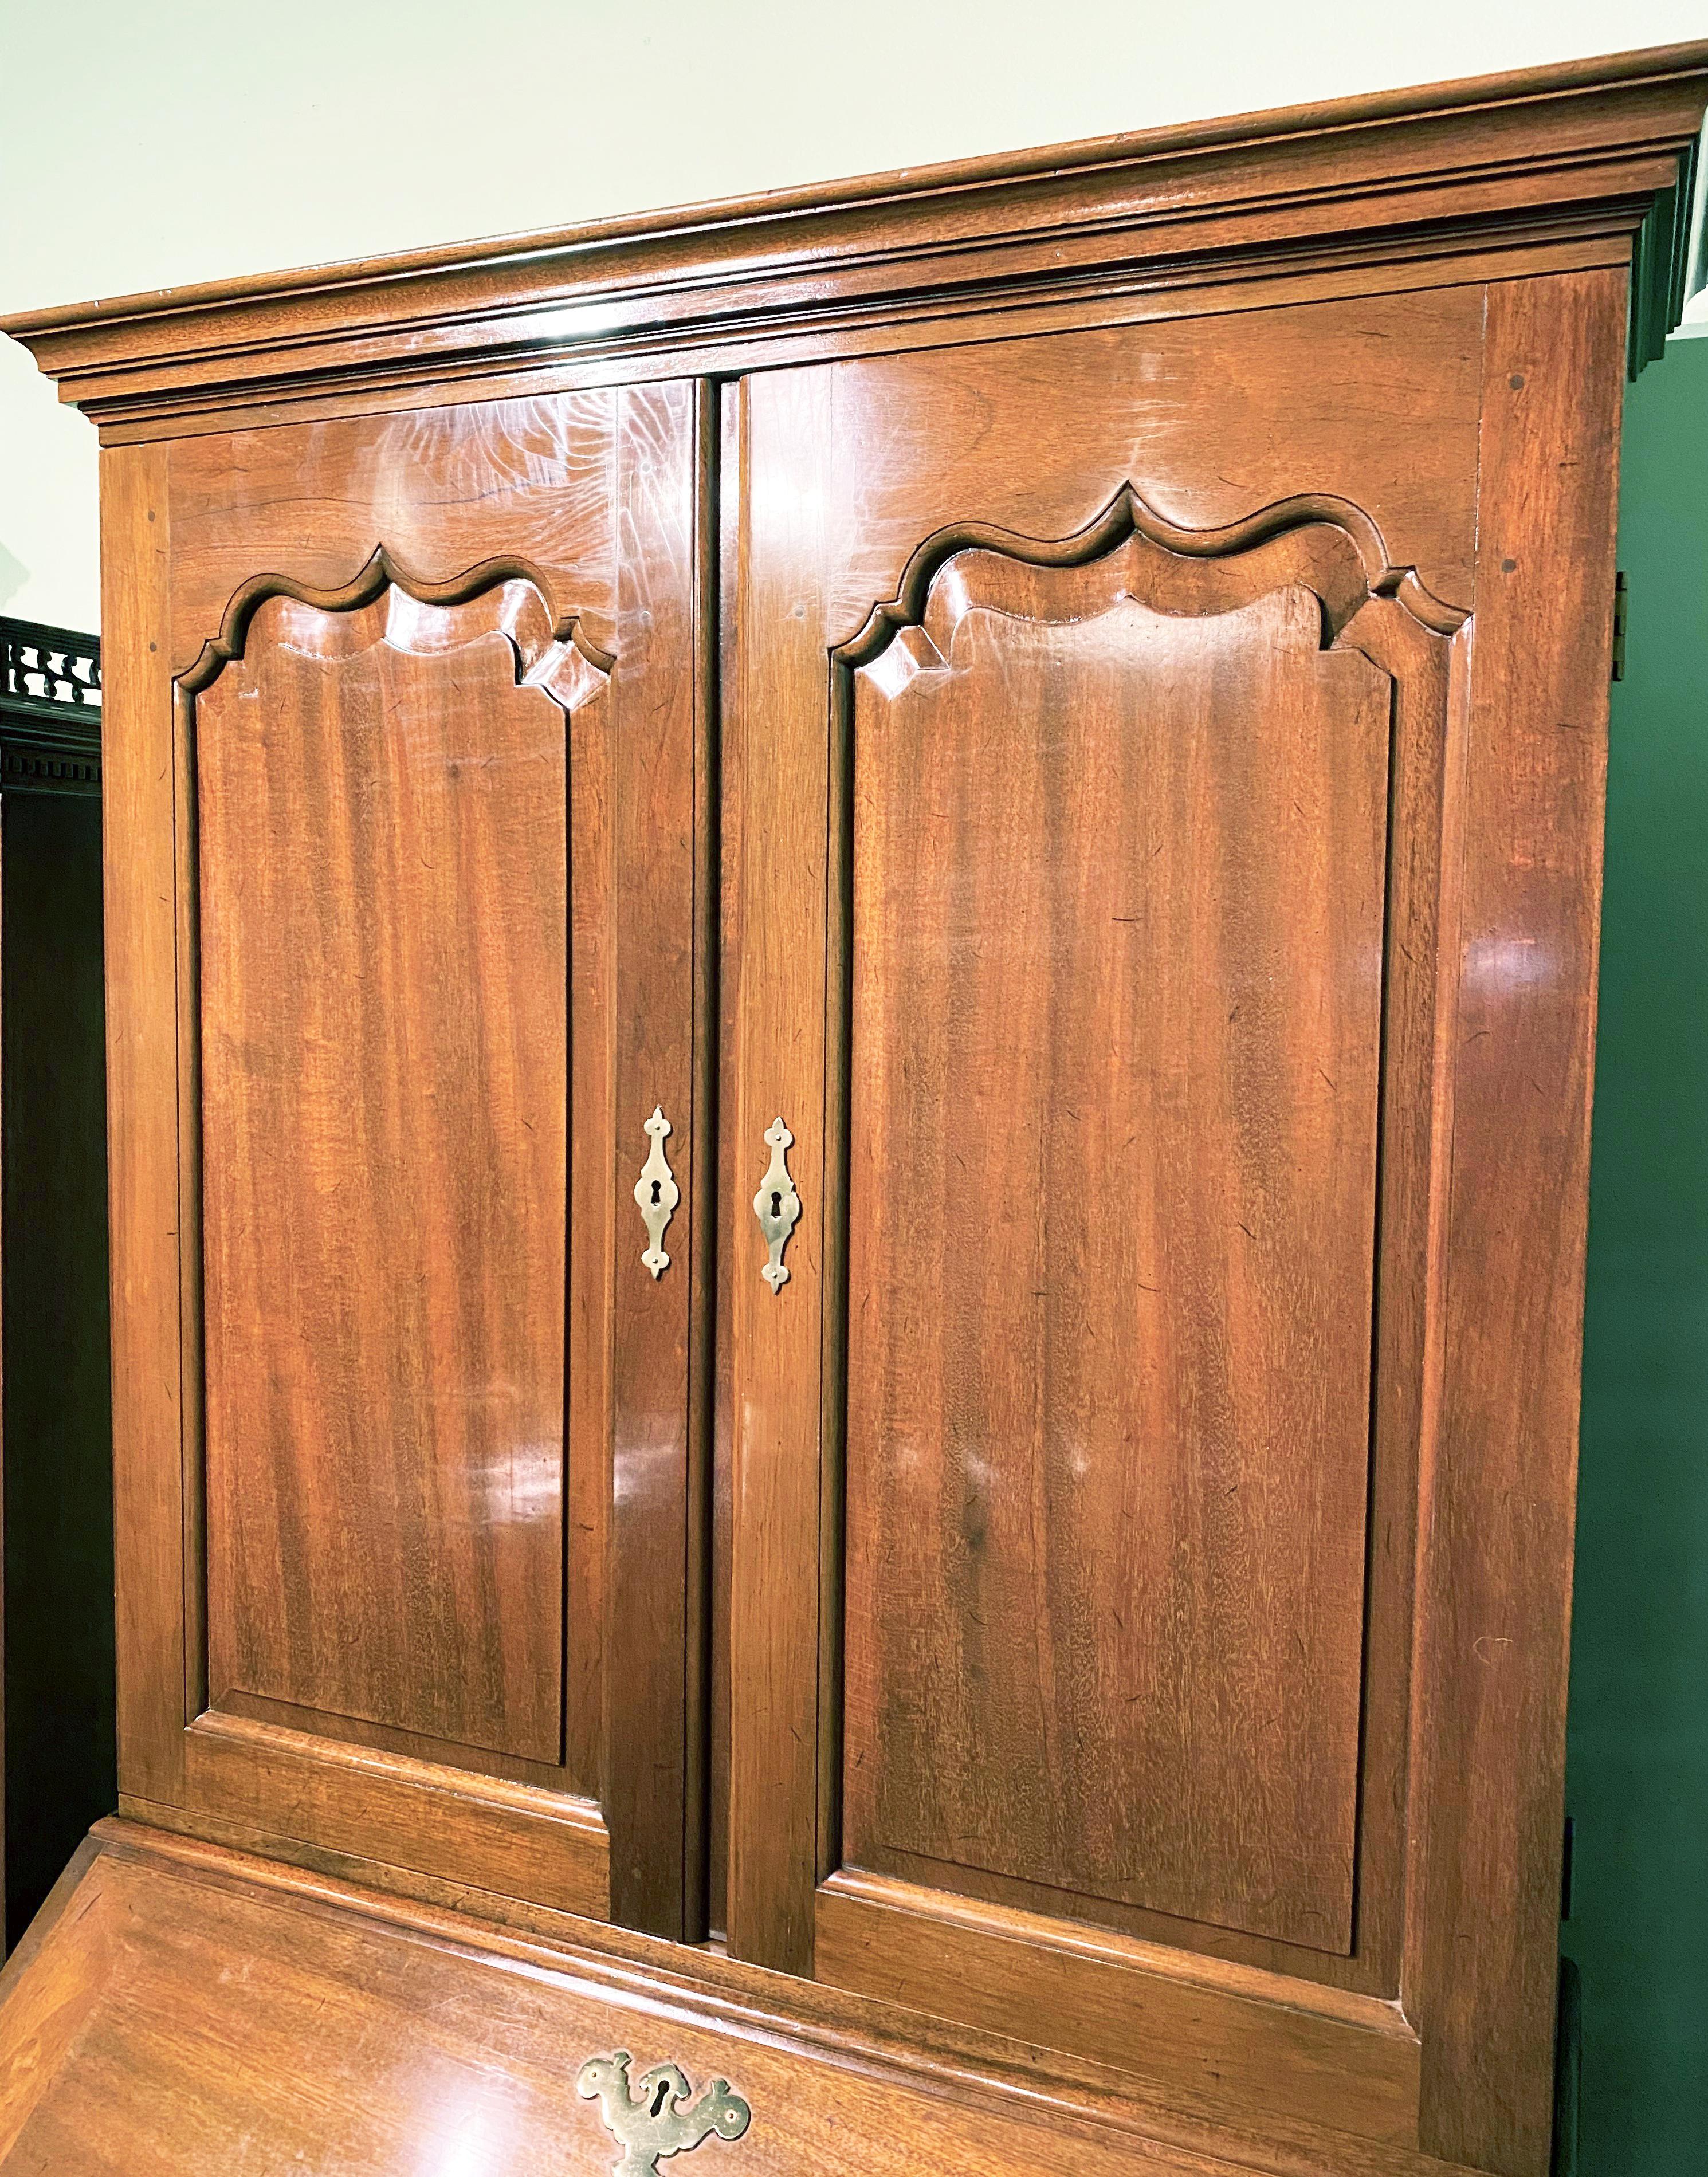 A fine example of a two piece mahogany blind door secretary desk / bookcase in the Chippendale style by Kittinger from their Williamsburg Adaptation collection, its upper case with a molded cornice surmounting two blind paneled doors, which opens to